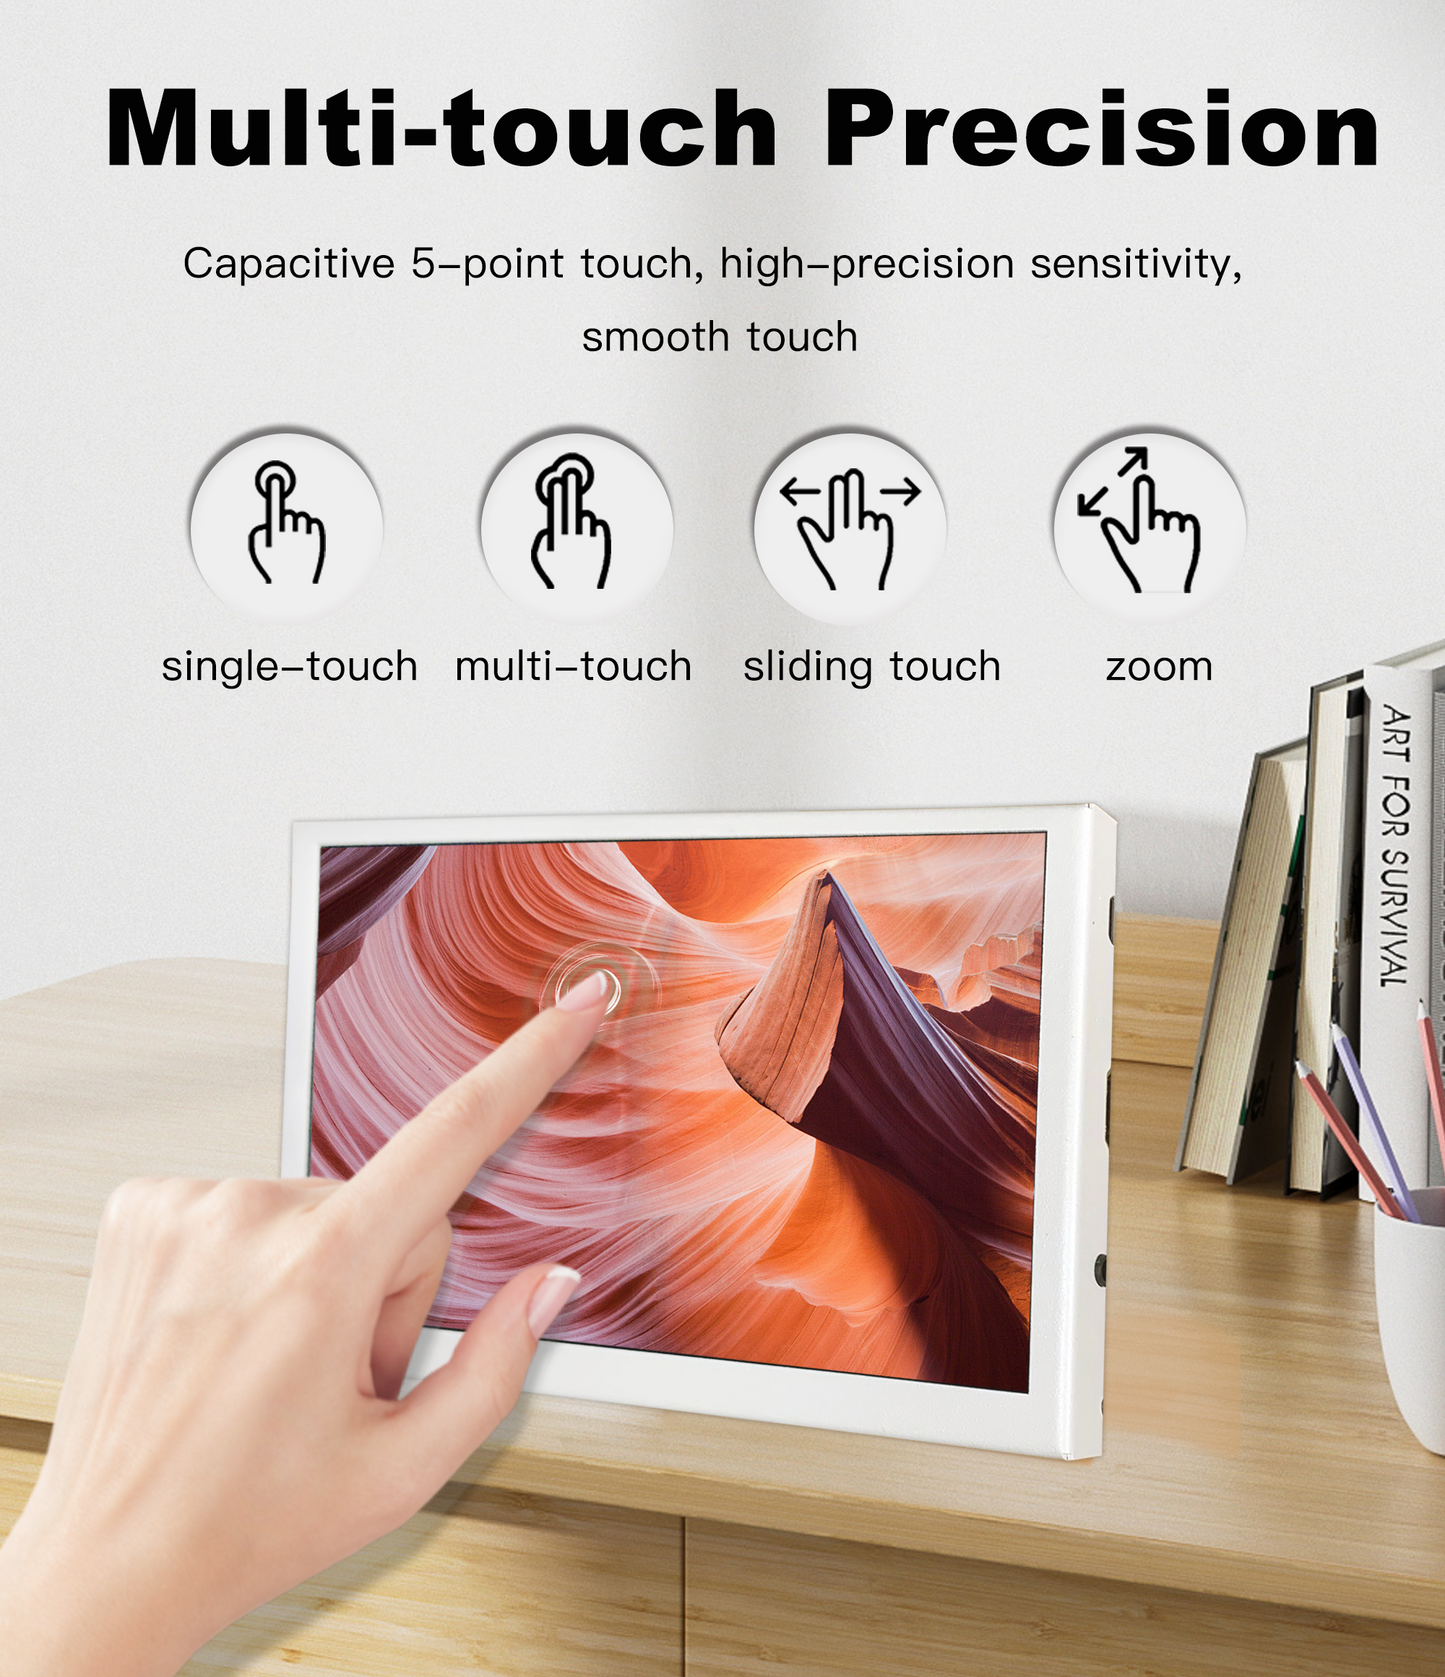 LESOWN P79W+S/P79W-T+S 7.9 inch Strip Display Small LCD Widescreen Touchscreen 400x1280 IPS Portable CPU GPU Temperature Monitoring Display